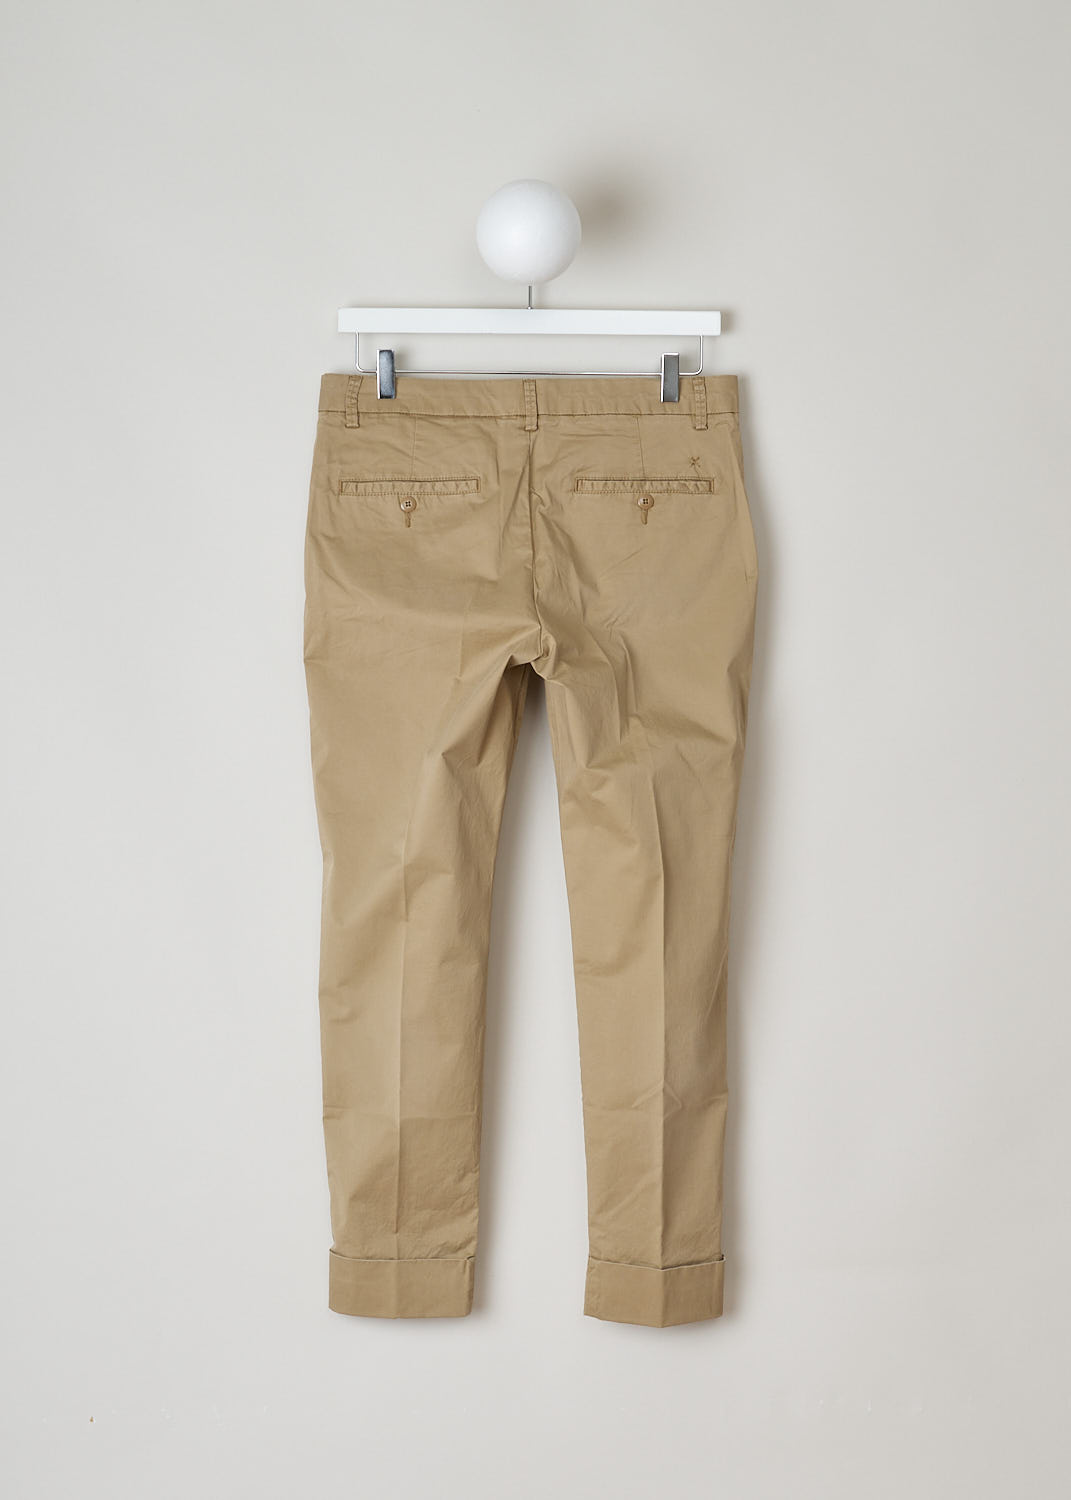 STEWART_C91796_53S_SR_919 CLOSED CLASSIC BEIGE TROUSERS Beige, Back, These classic trousers in beige feature belt loops and a zipper and button closure. They feature slanted pockets on the front and two buttoned welt pockets on the back. What makes this model stand out the is the broad fold-over hem.
 